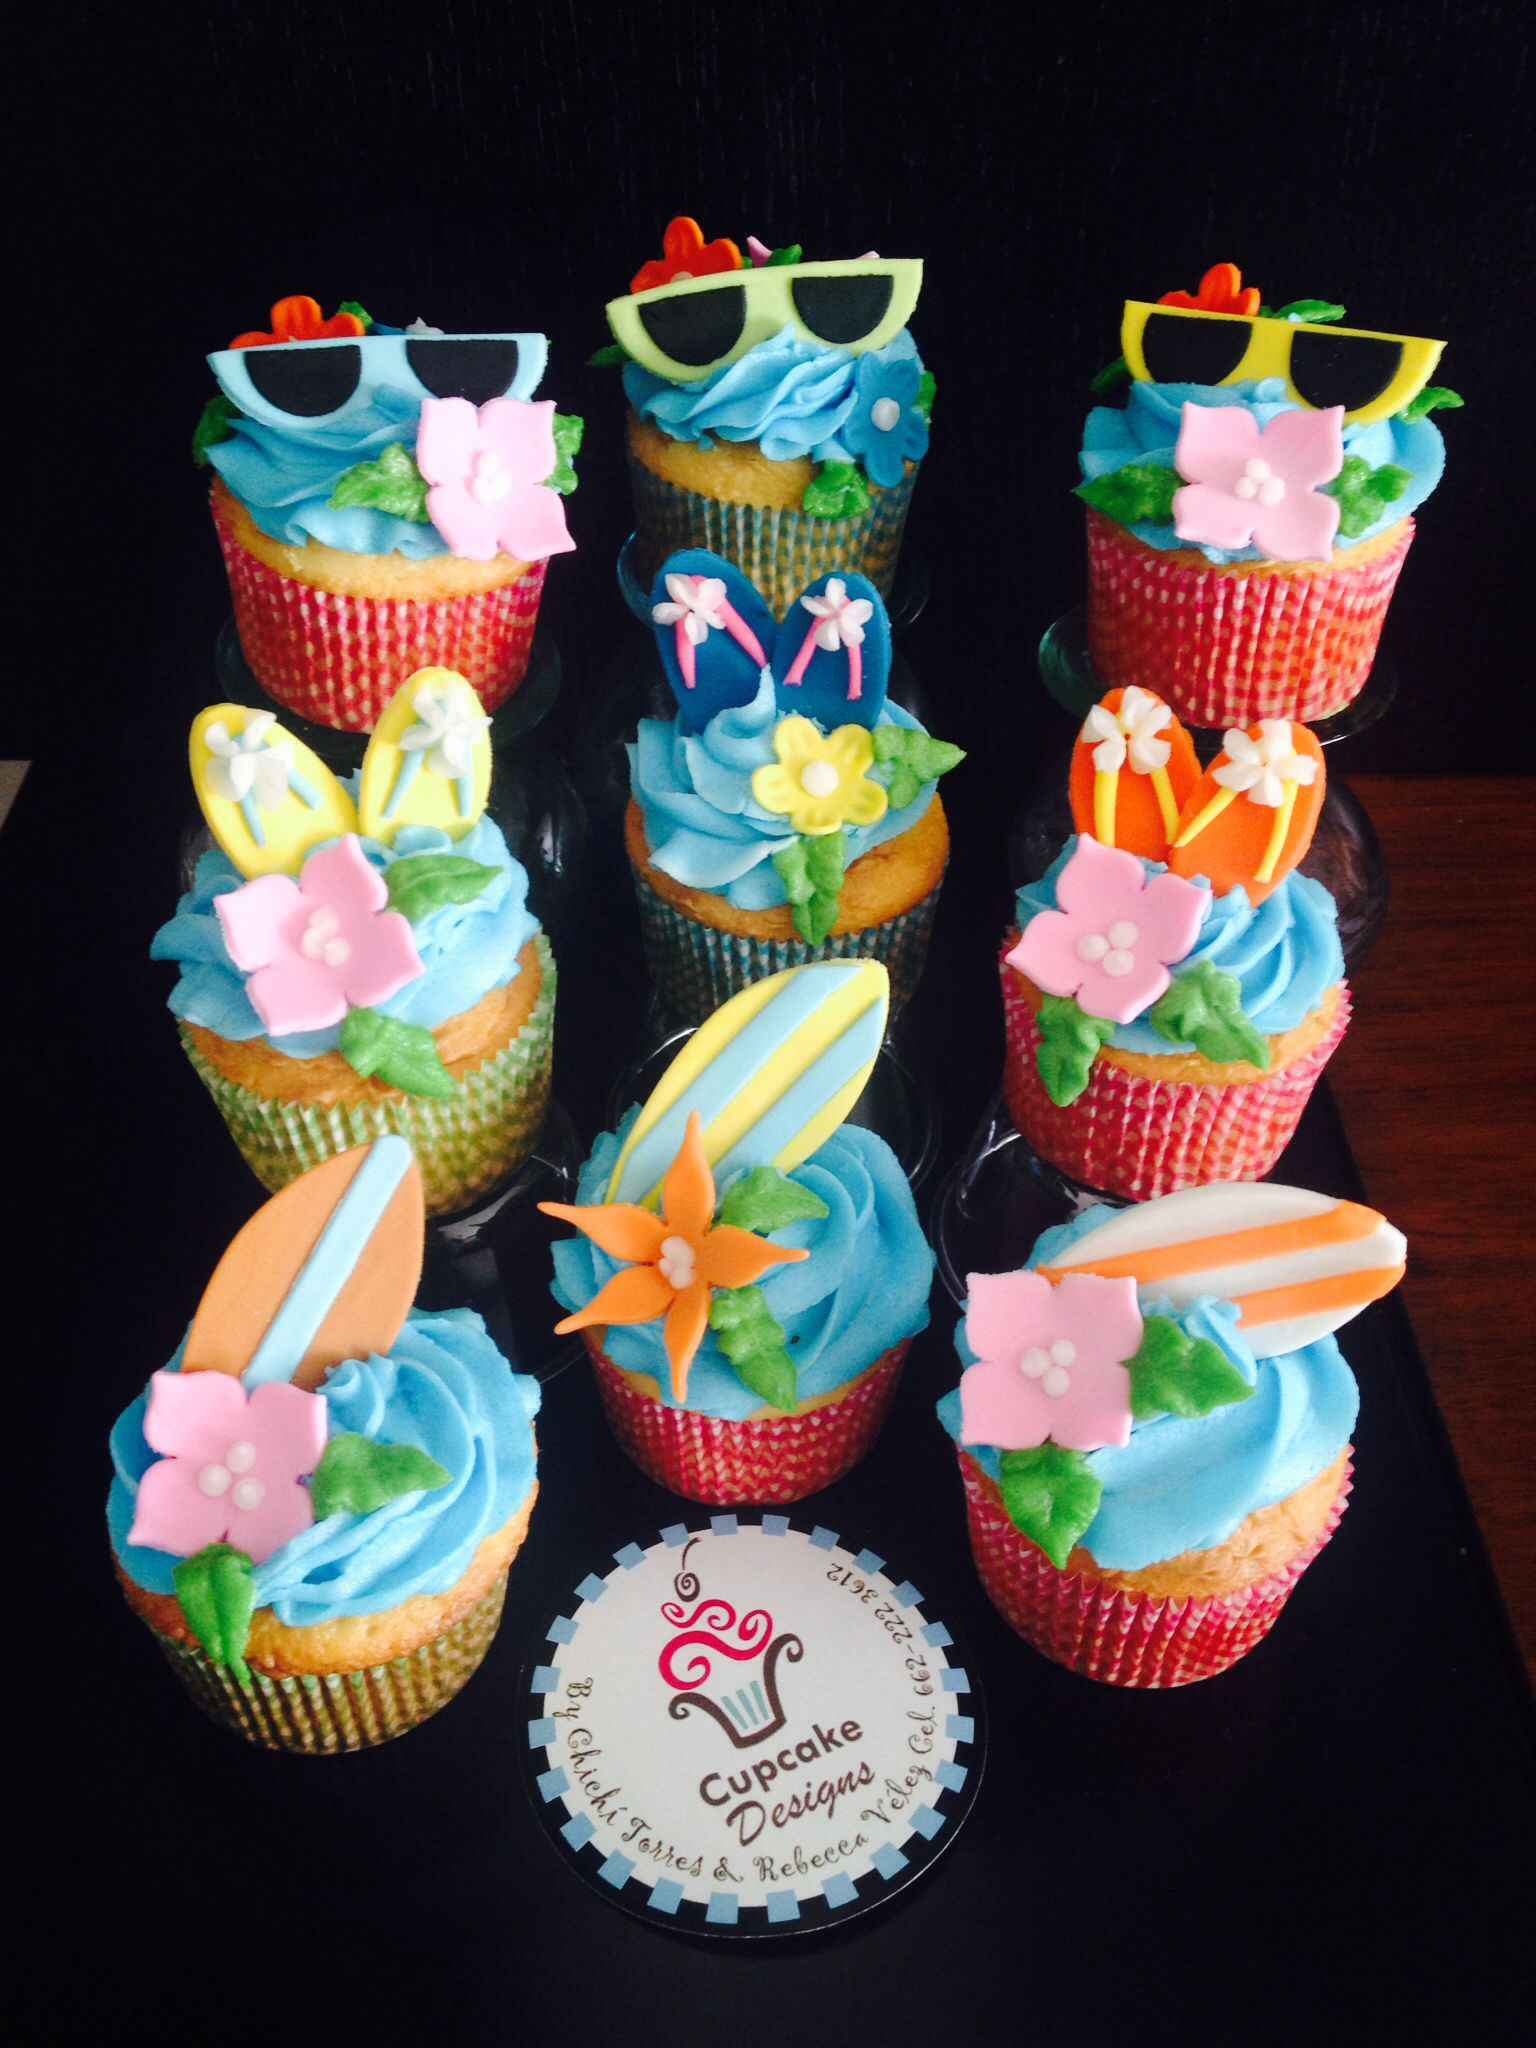 Pool Party Cupcake Ideas
 Swimming pool party cupcakes Cupcakes in 2019